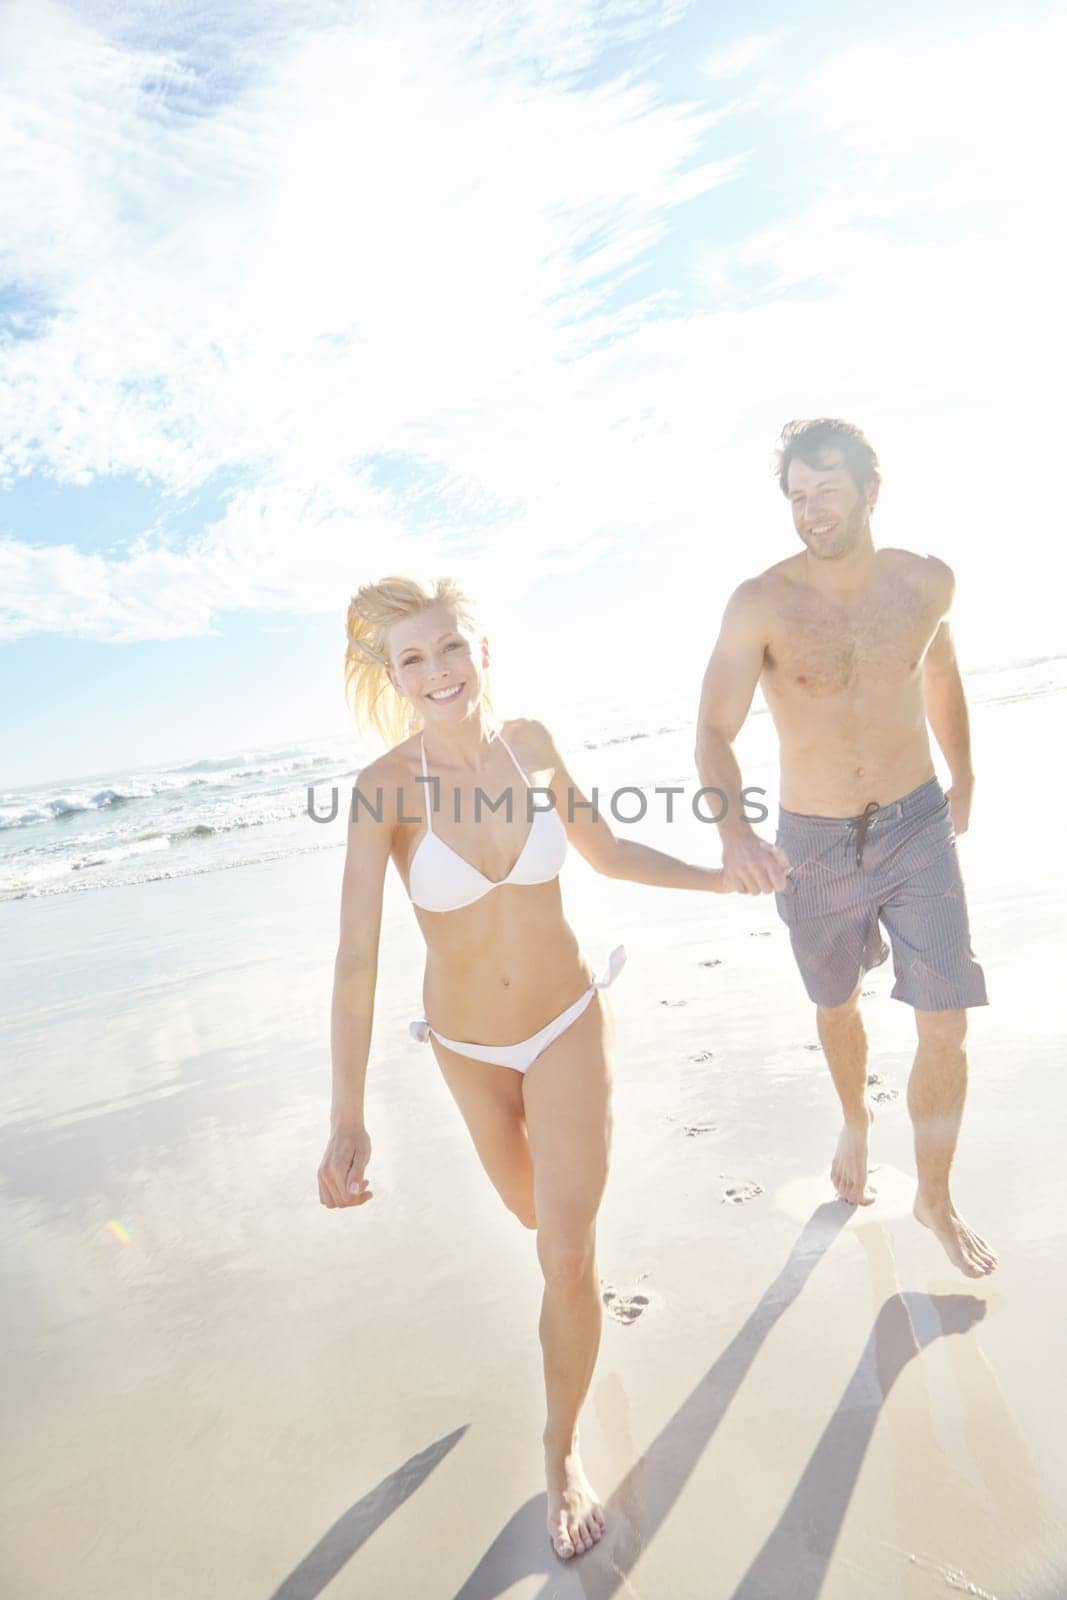 Beauty and the beach. a young couple running on a beach